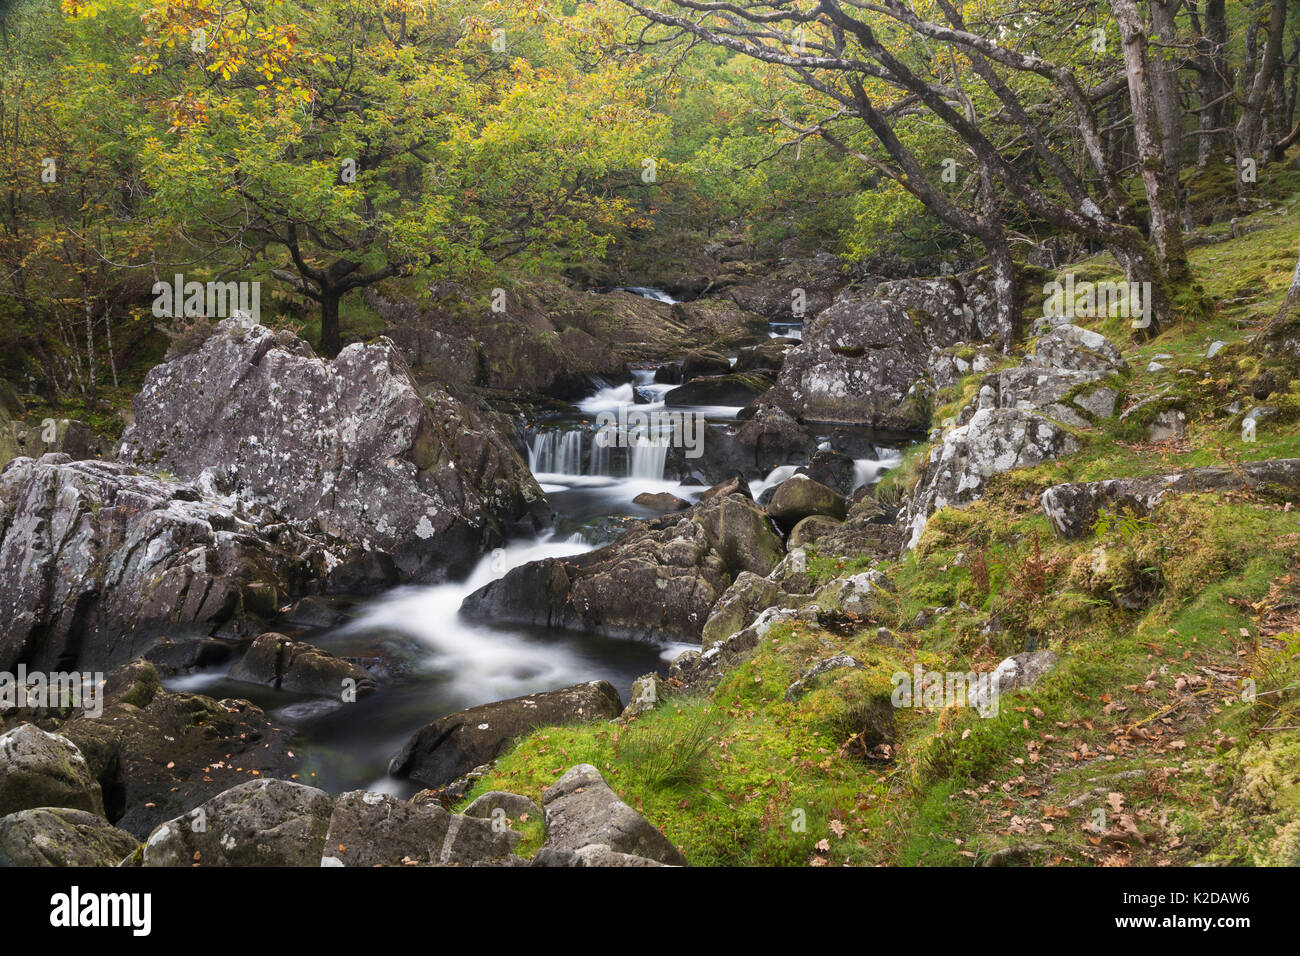 Oak woodland with mosses and running water, near Dolgellau, Snowdonia, North Wales, UK October Stock Photo